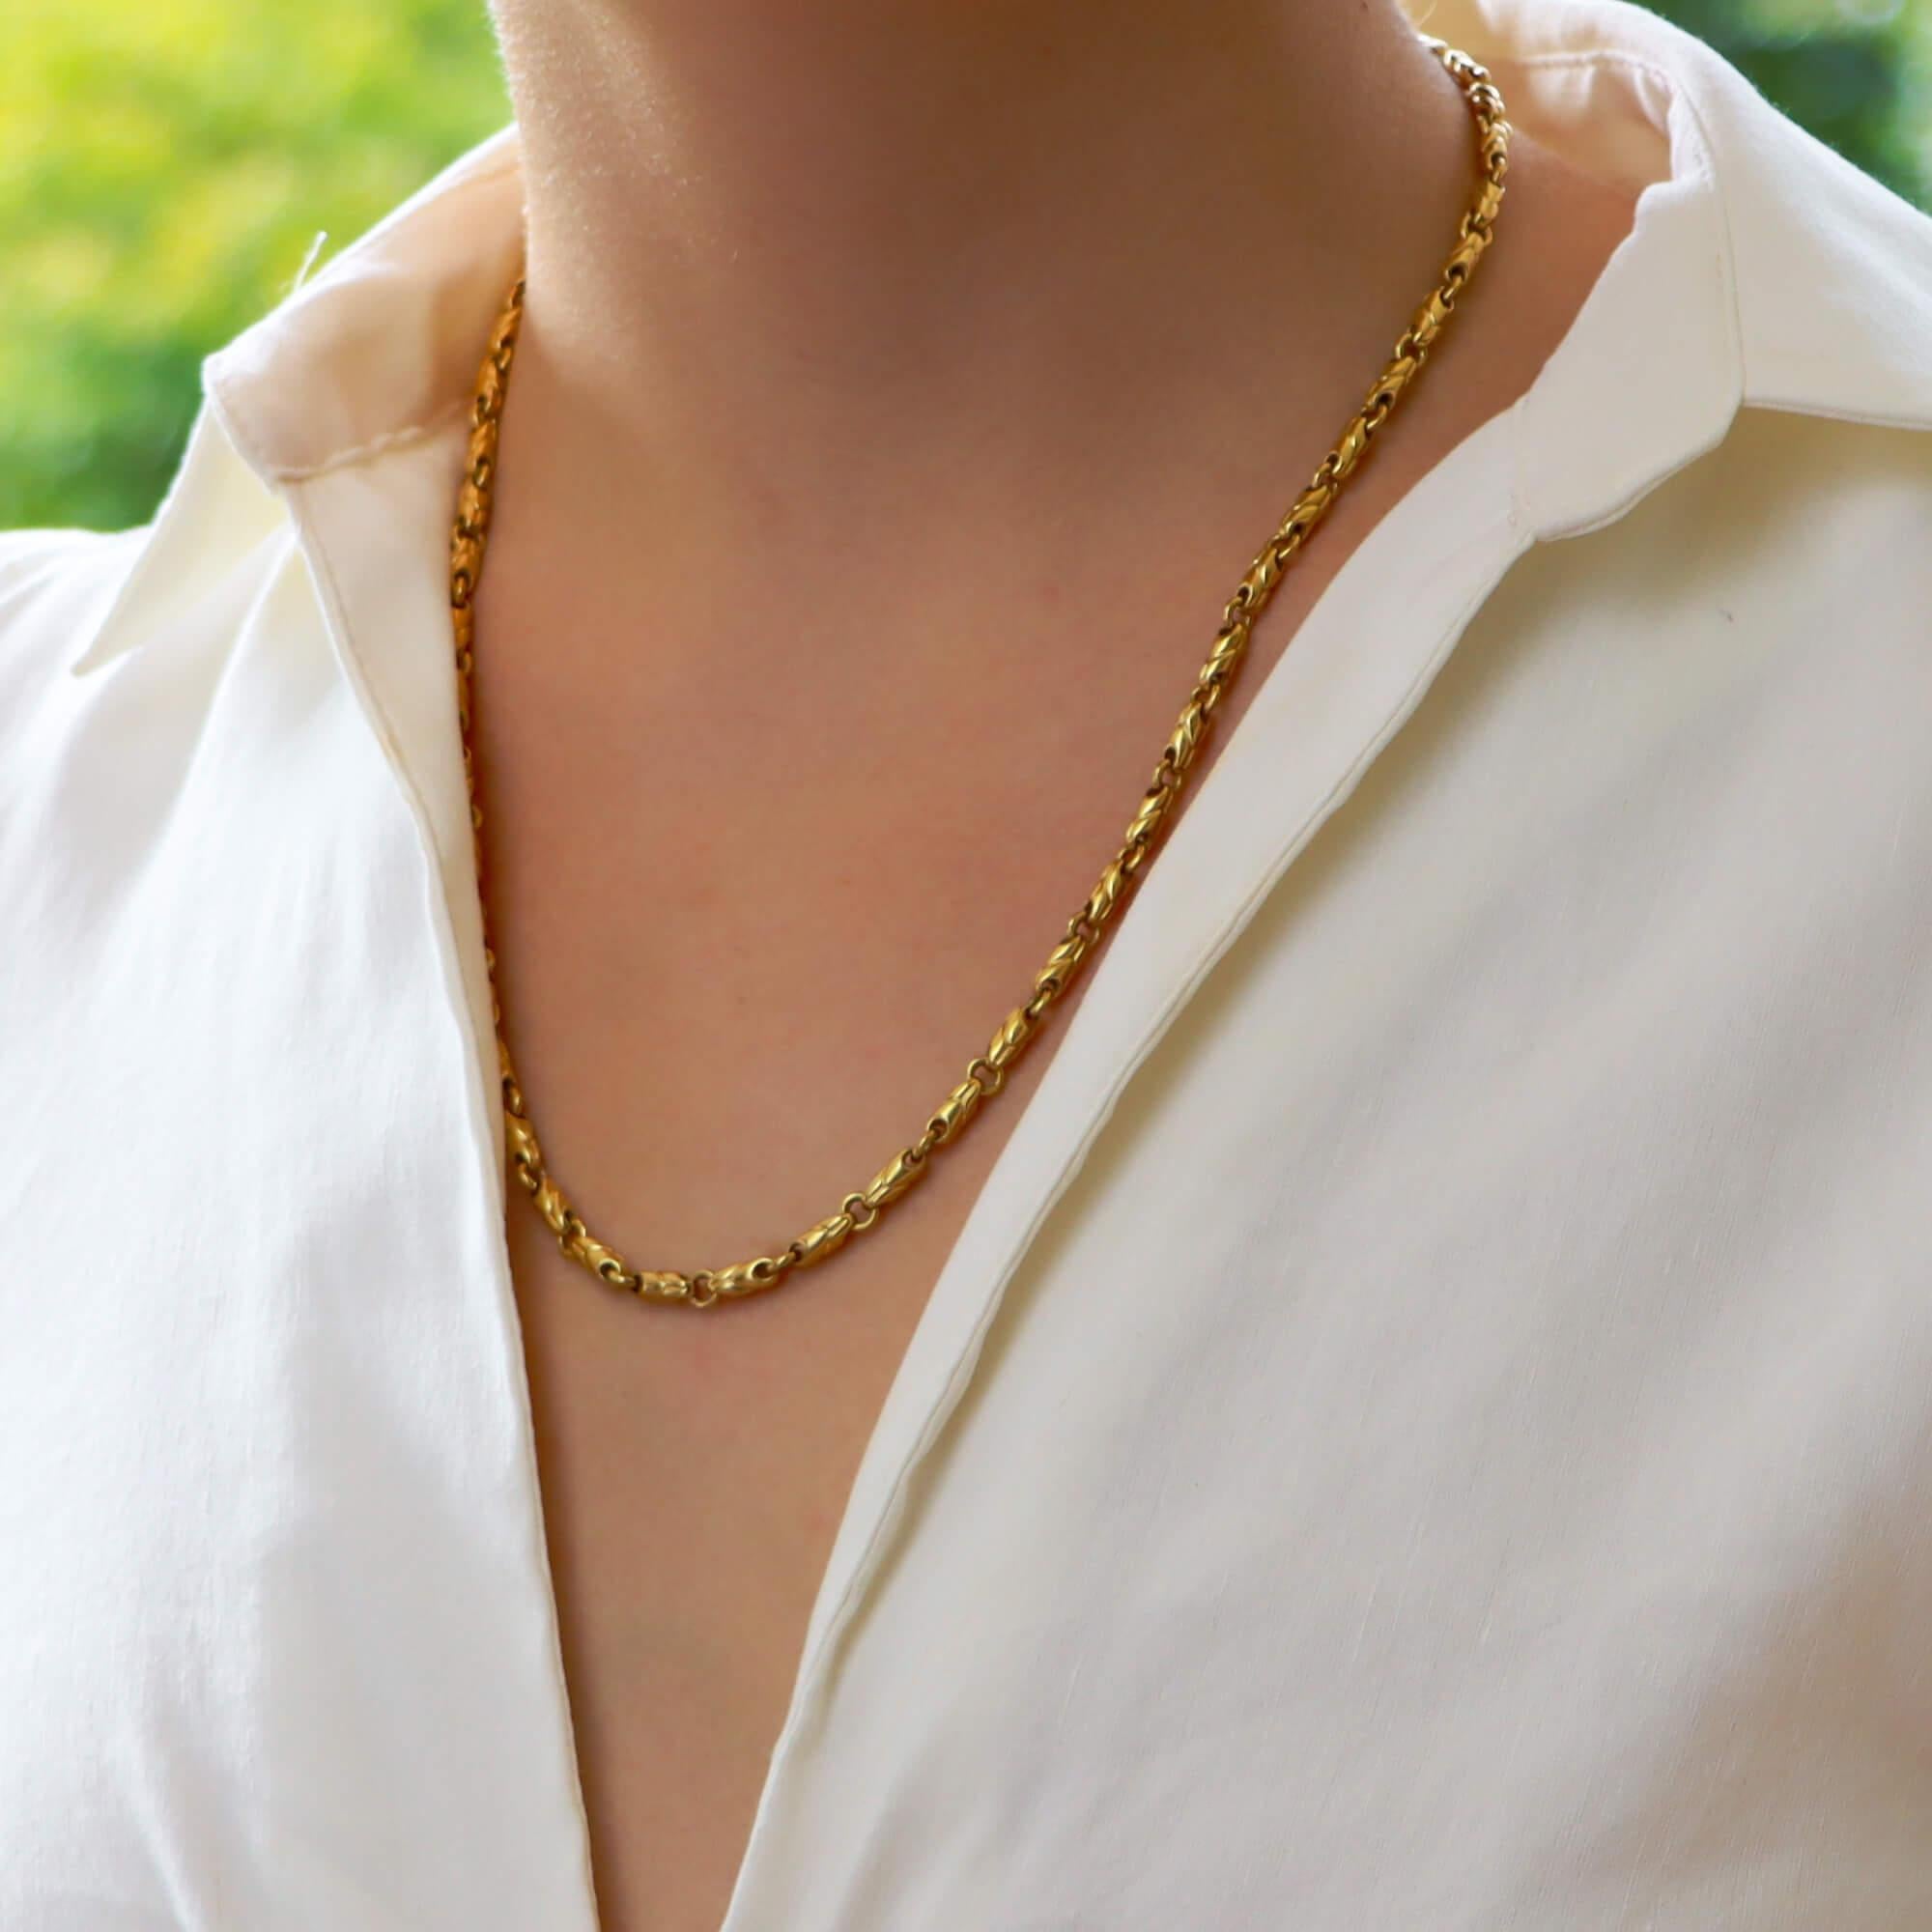 An extremely stylish vintage Bvlgari fancy link chain necklace in solid 18k yellow gold.

The chain is composed of 48 individual fancy links and fastened with a secure lobster clasp. Due to the length and the design, this piece could be worn by